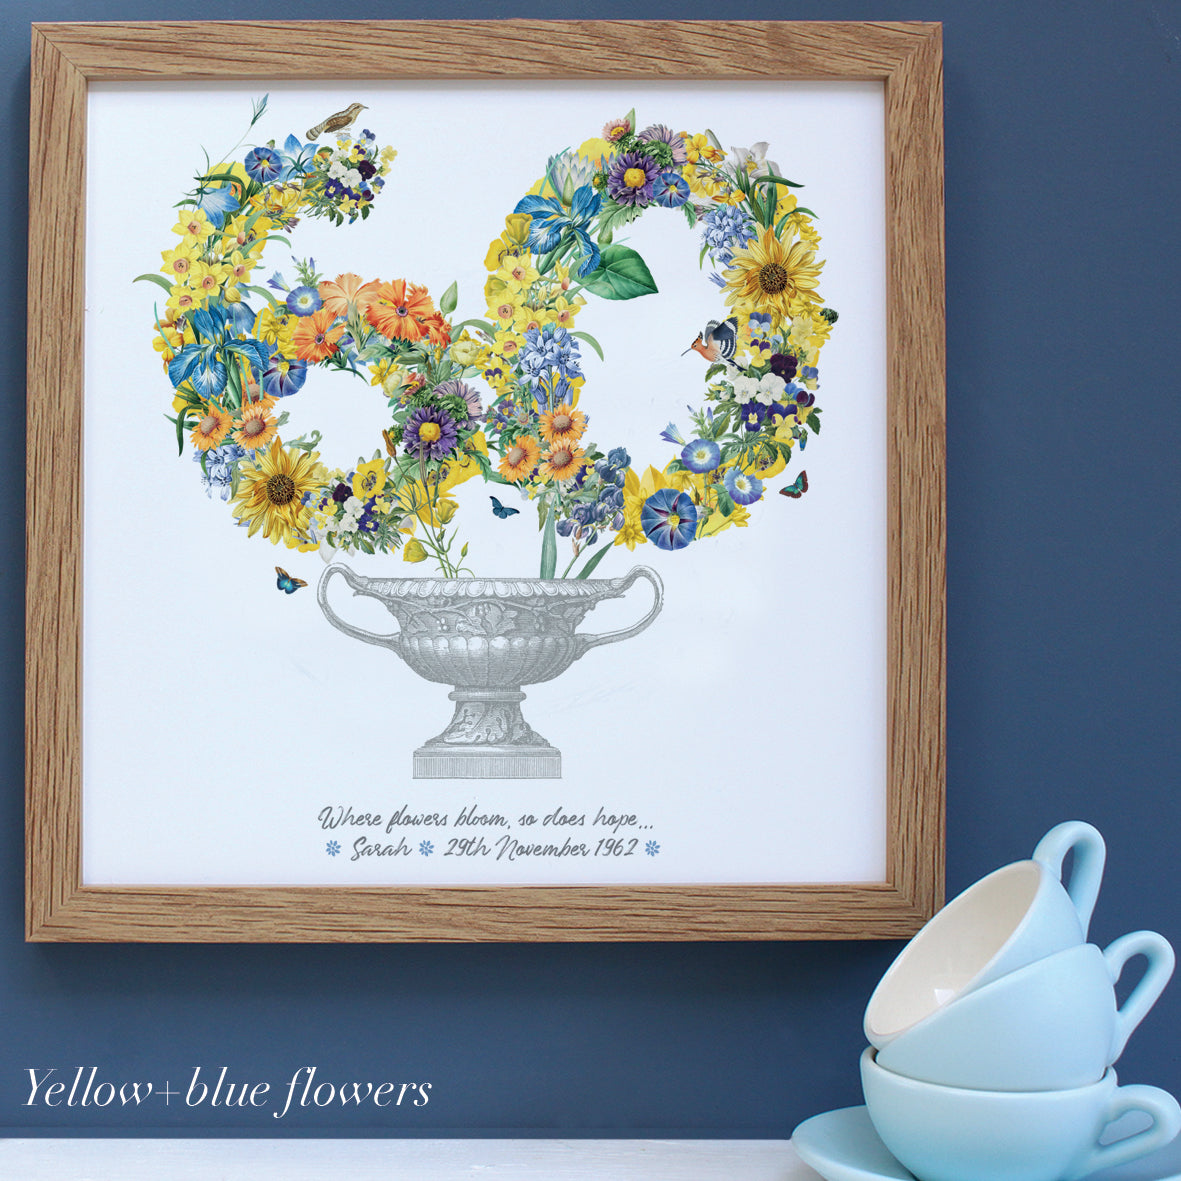 60th birthday framed gift with yellow and blue flowers in an oak frame